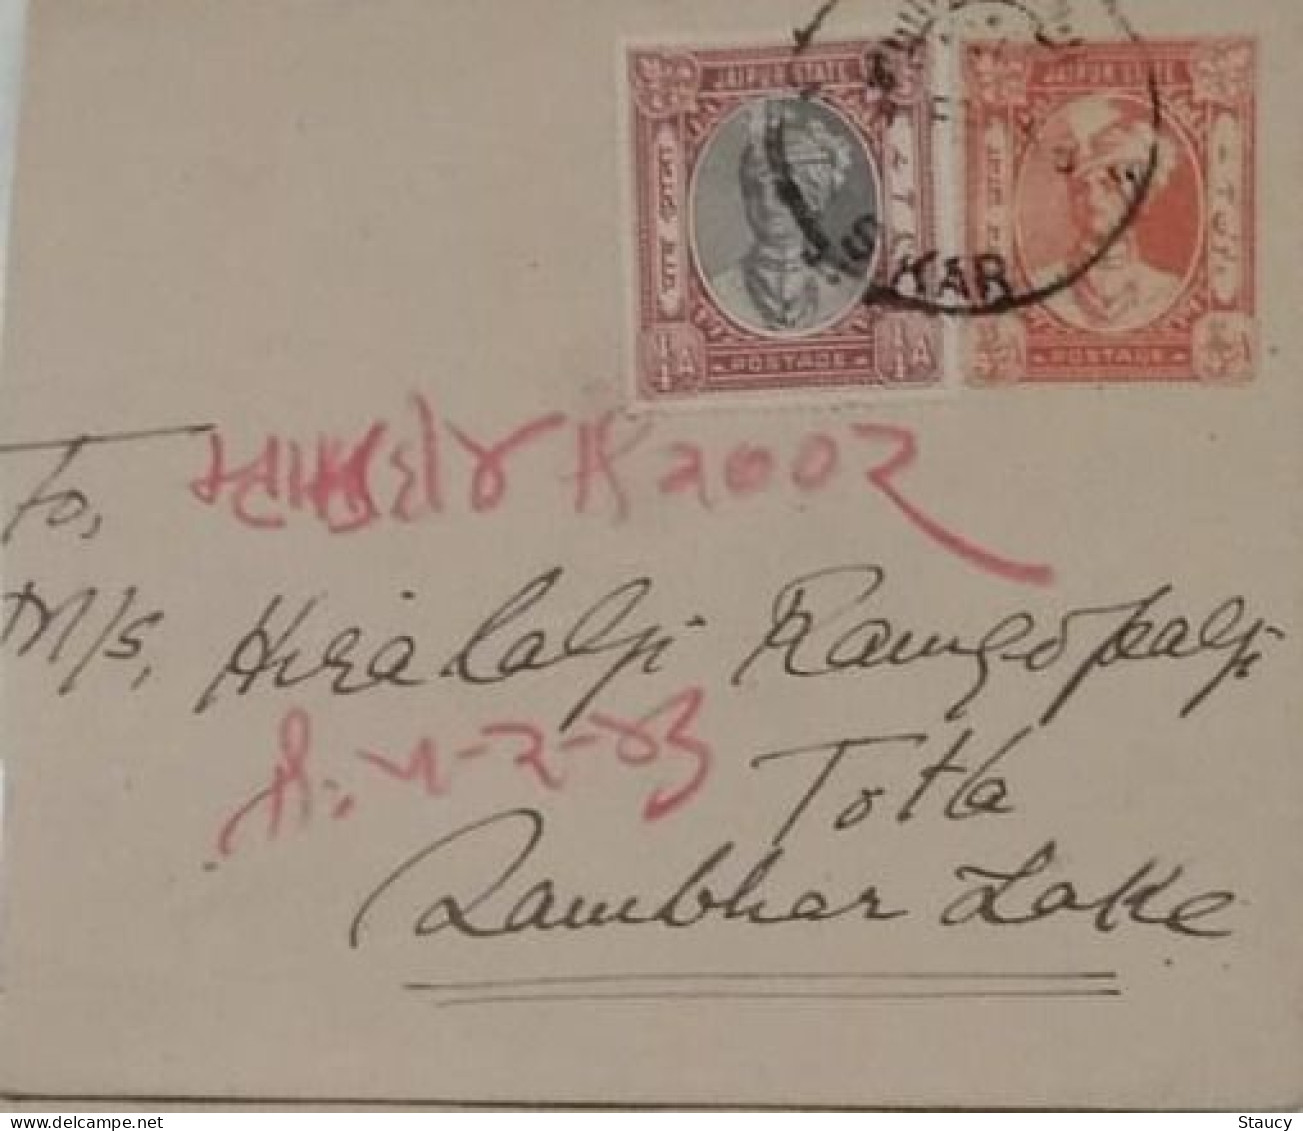 BRITISH INDIA 1943 1/4a Anna FRANKING On 3/4a "JAYPORE STATE" Stationery COVER, NICE CANCEL ON Front & Back As Per Scan - Jaipur